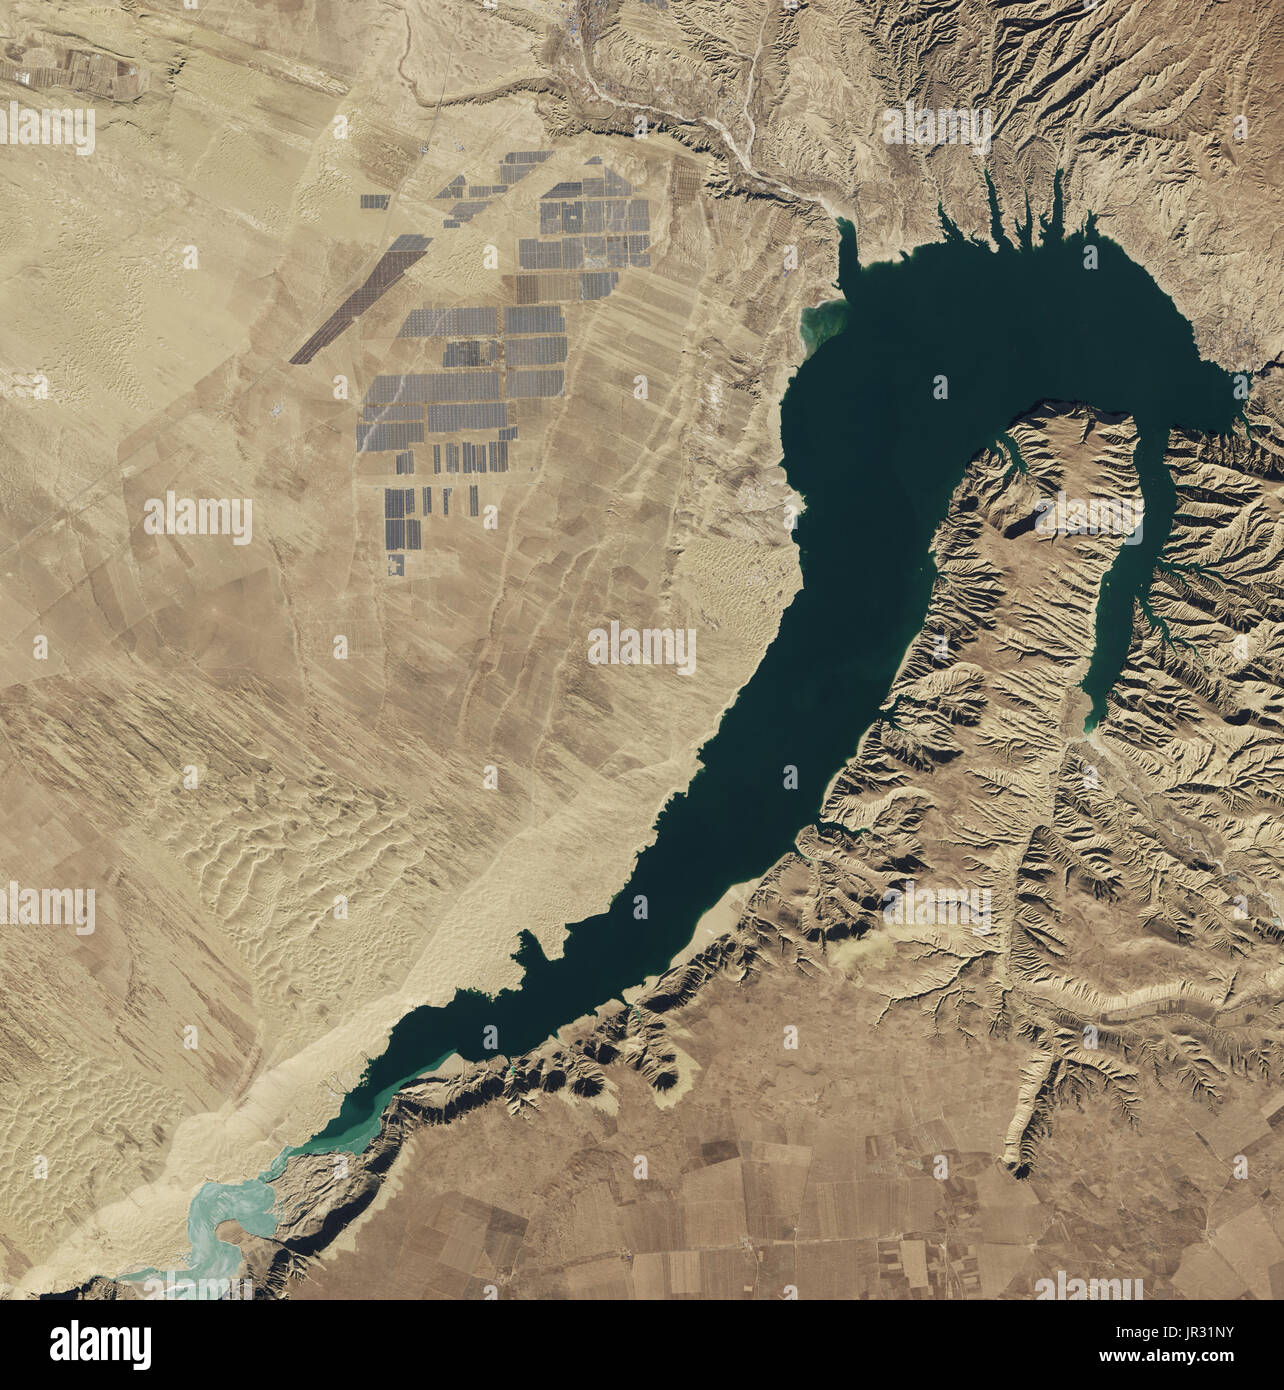 Longyangxia Dam Solar Park in China, the largest solar farm in the world as of February 2017, captured by the Operational Land Imager (OLI) on Landsat 8. Water in the dam's reservoir is used for irrigation and hydroelectric power. Stock Photo